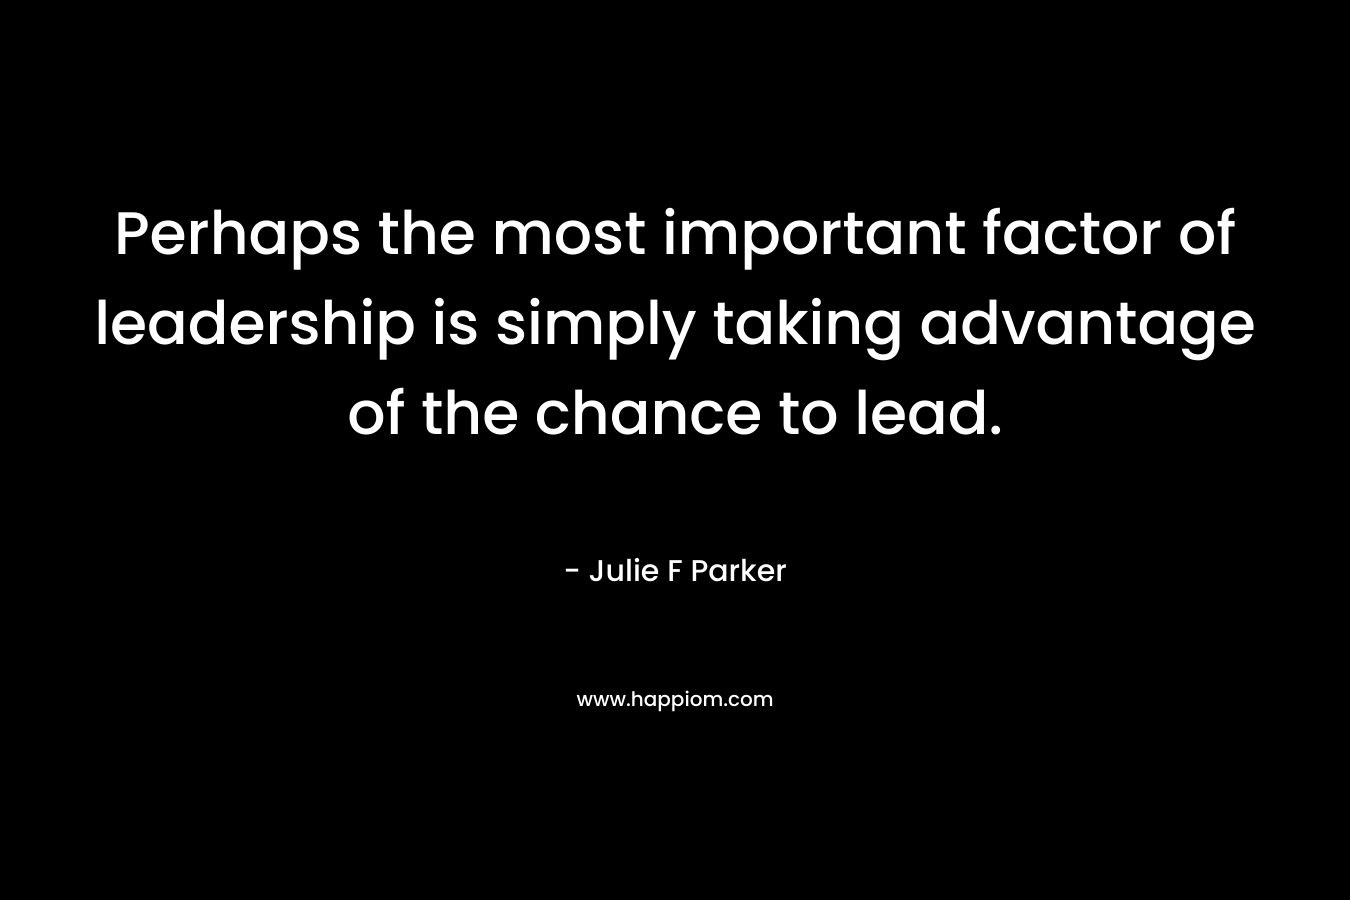 Perhaps the most important factor of leadership is simply taking advantage of the chance to lead.